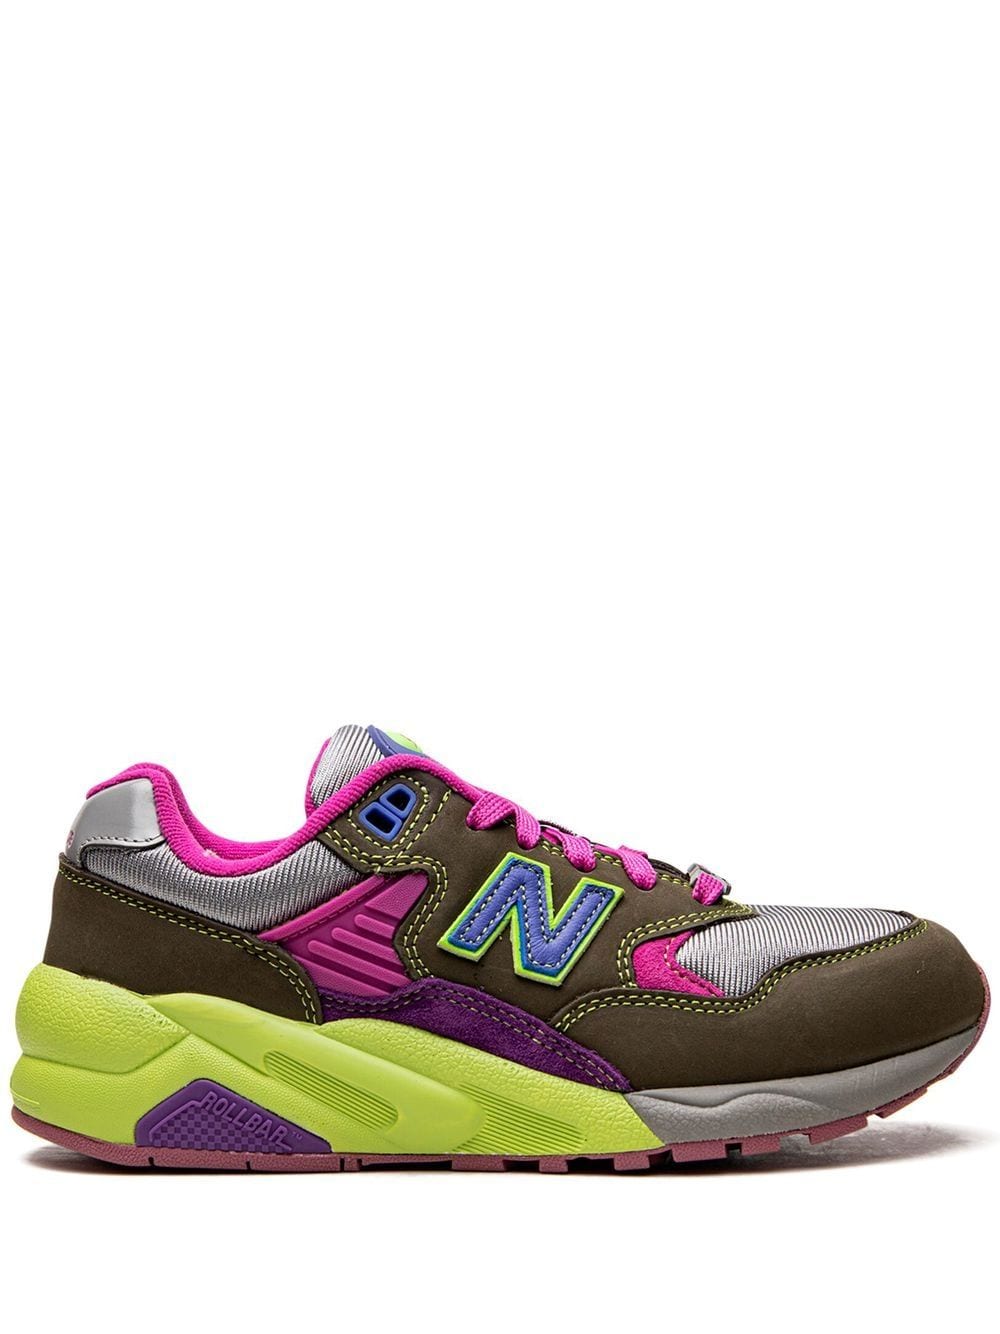 New Balance x Stray Rats 580 low-top sneakers "Pink/Khaki" - Green